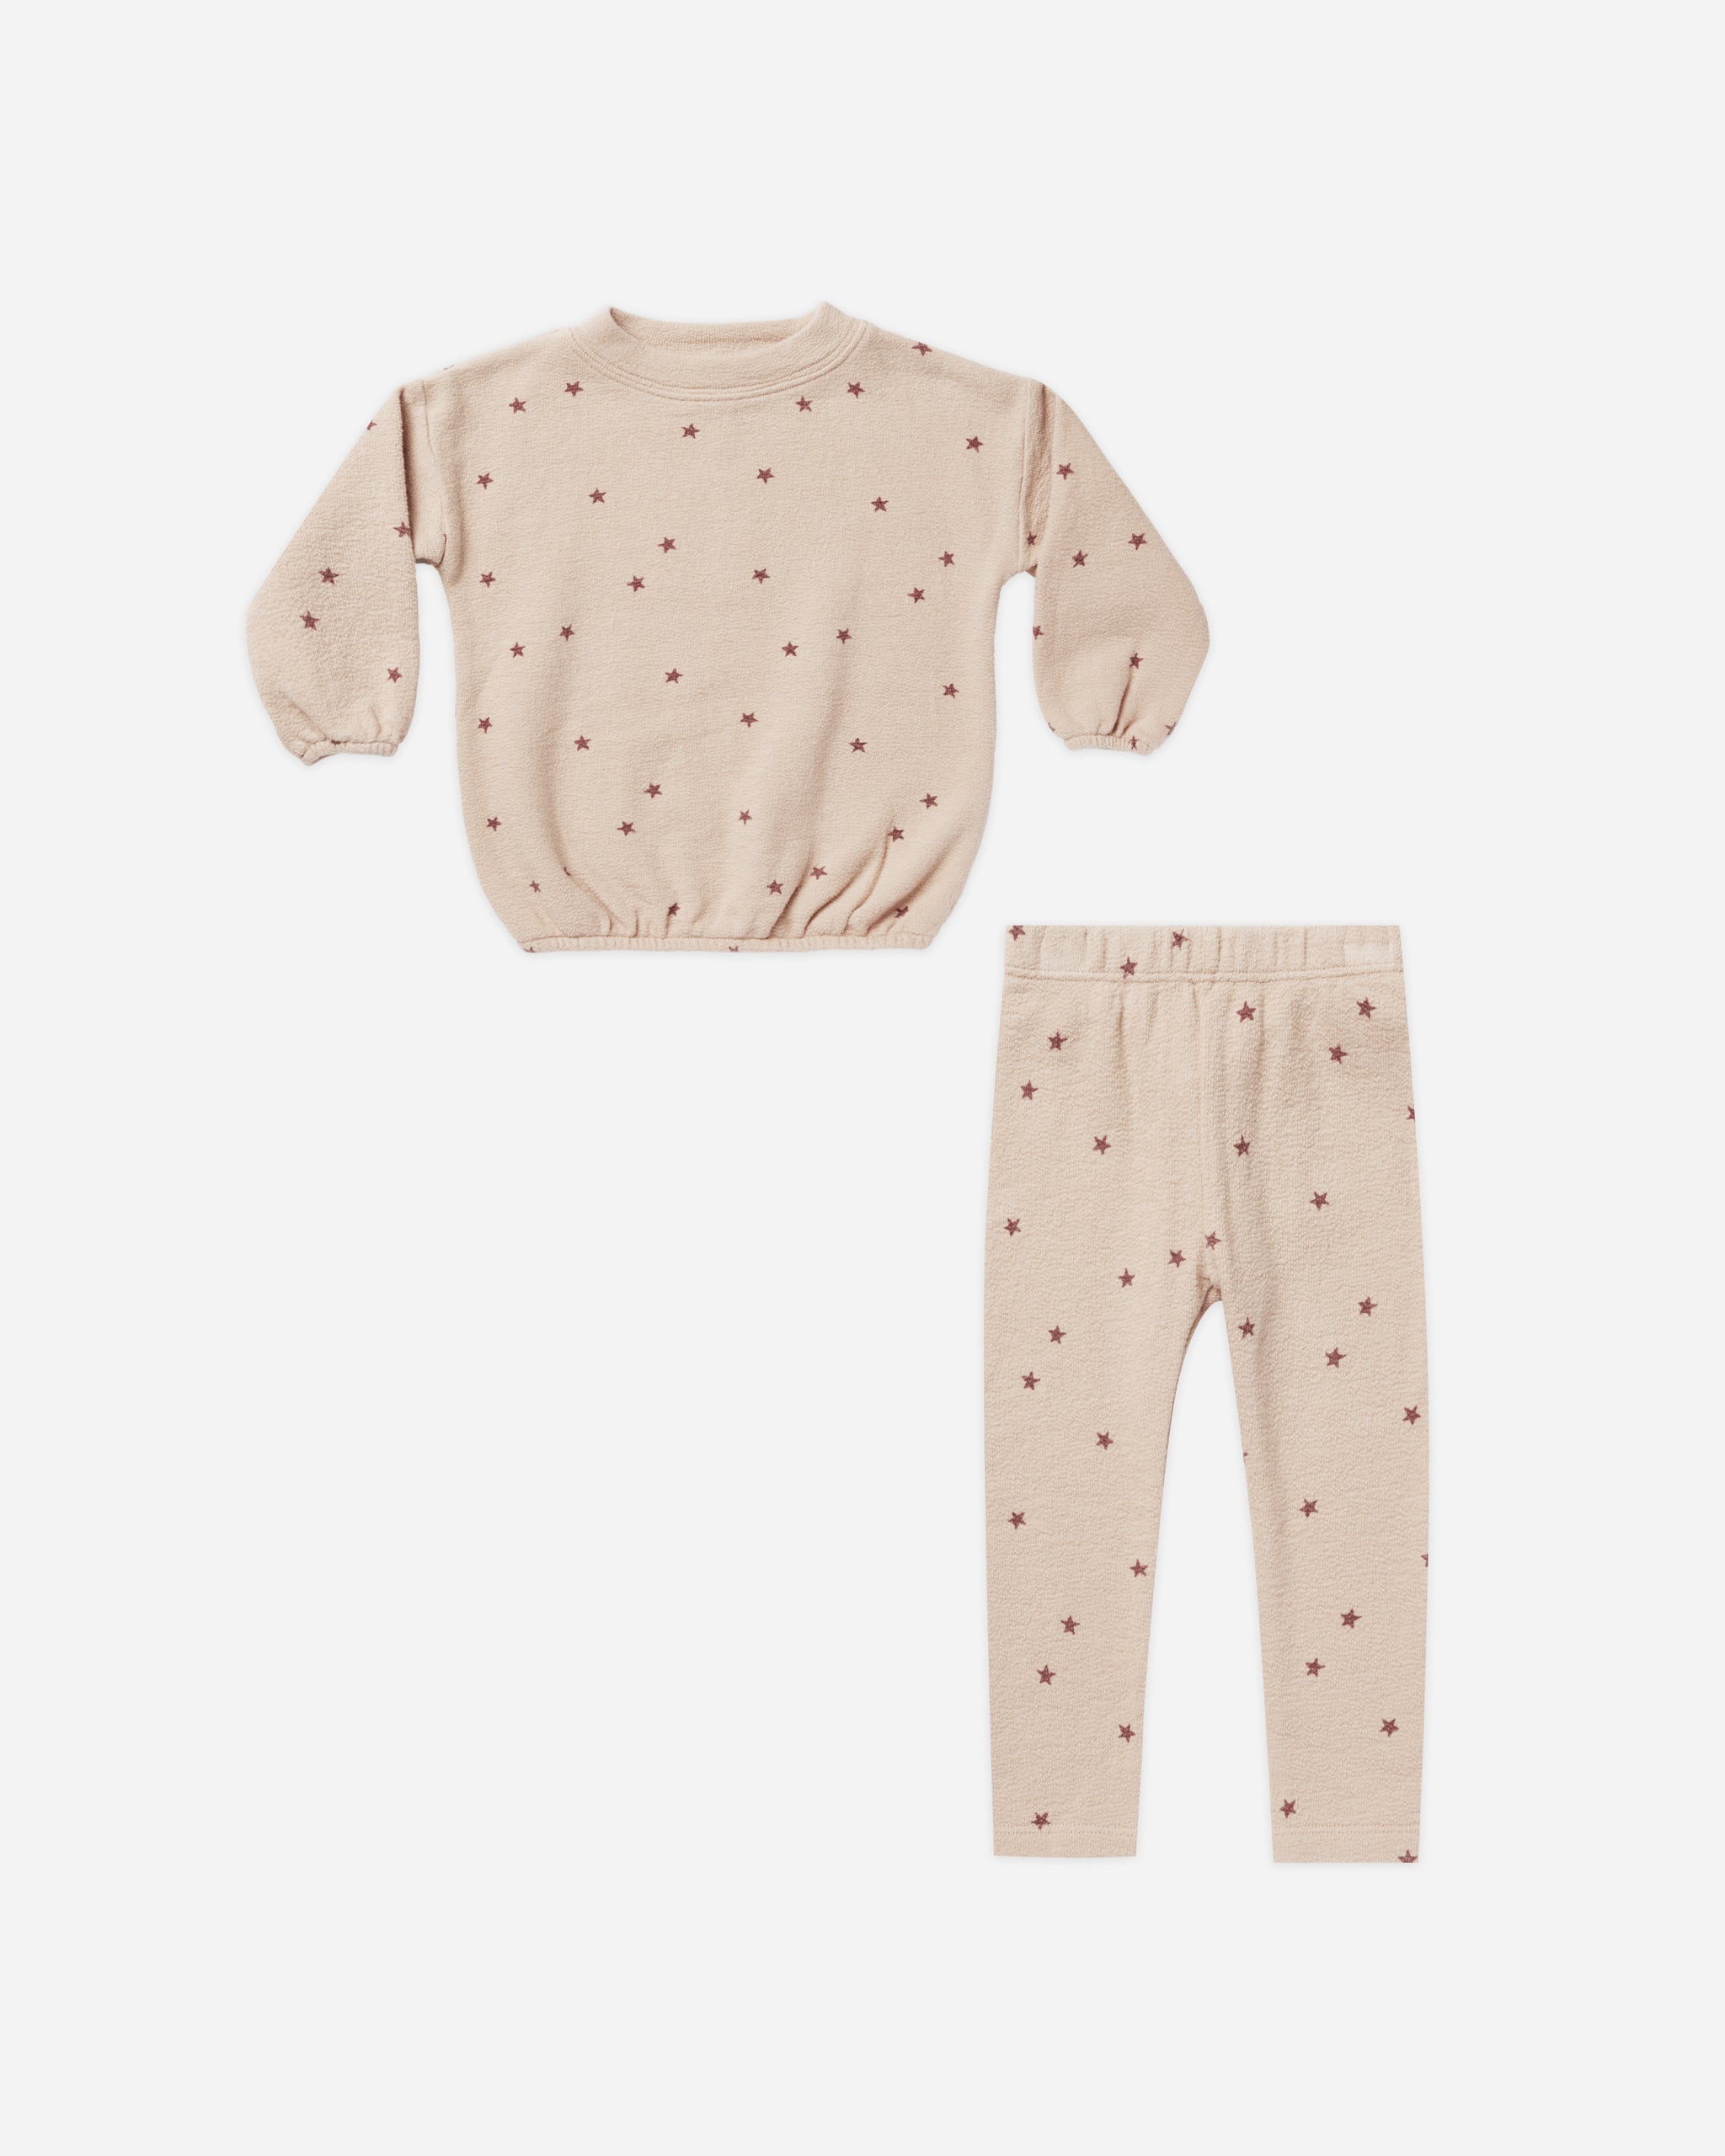 Spongy Knit Set || Stars - Rylee + Cru | Kids Clothes | Trendy Baby Clothes | Modern Infant Outfits |